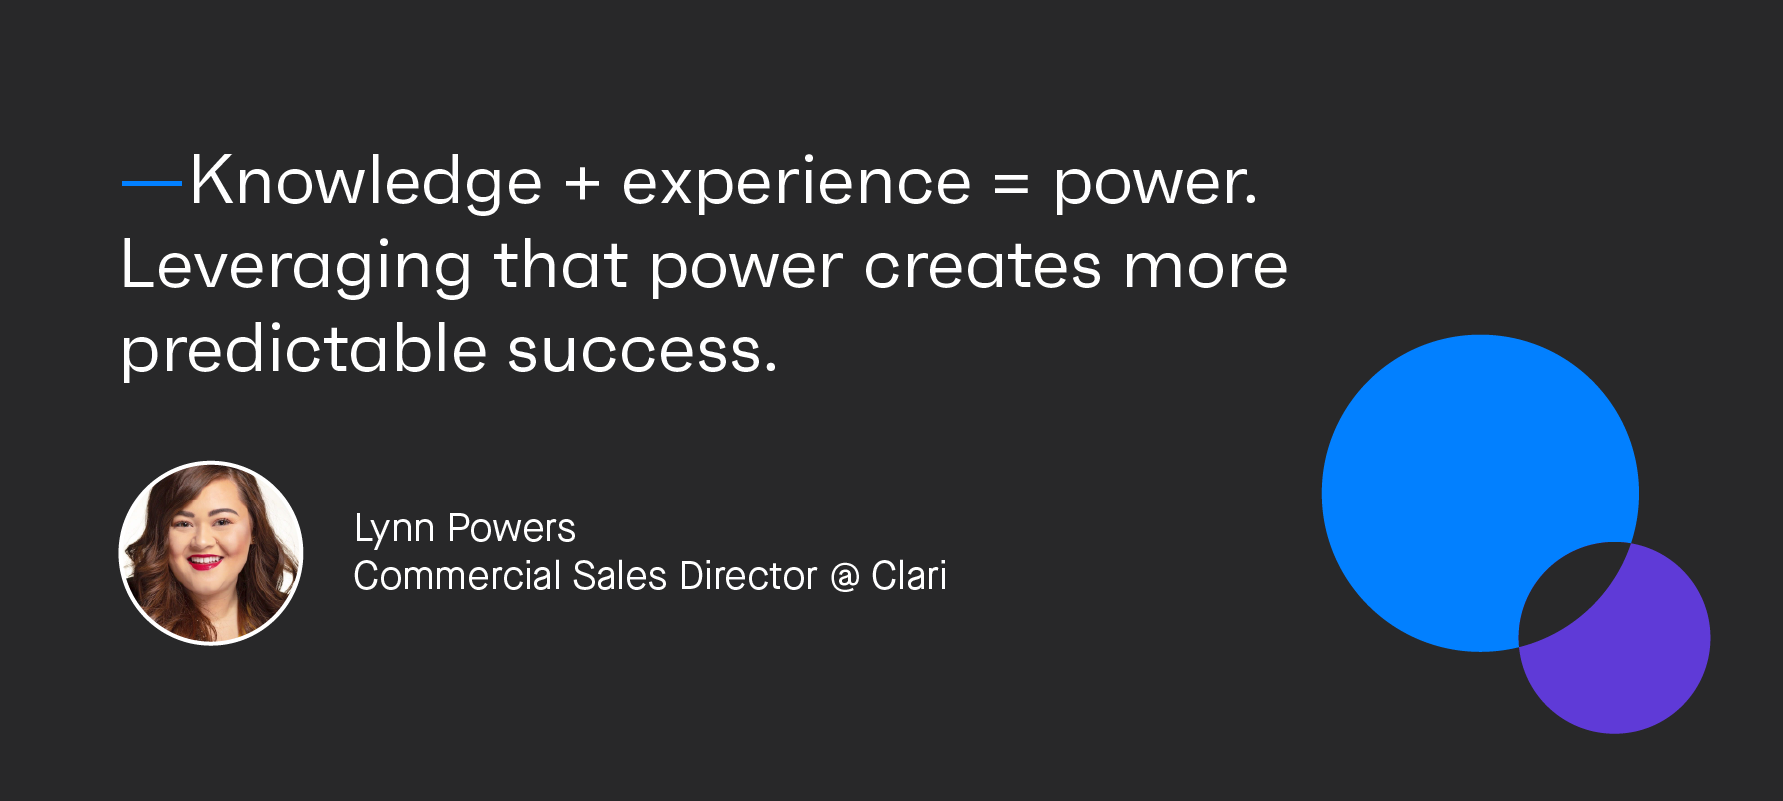 Banner image with headshot photograph of Lynn Powers, Commercial Sales Director at Clari